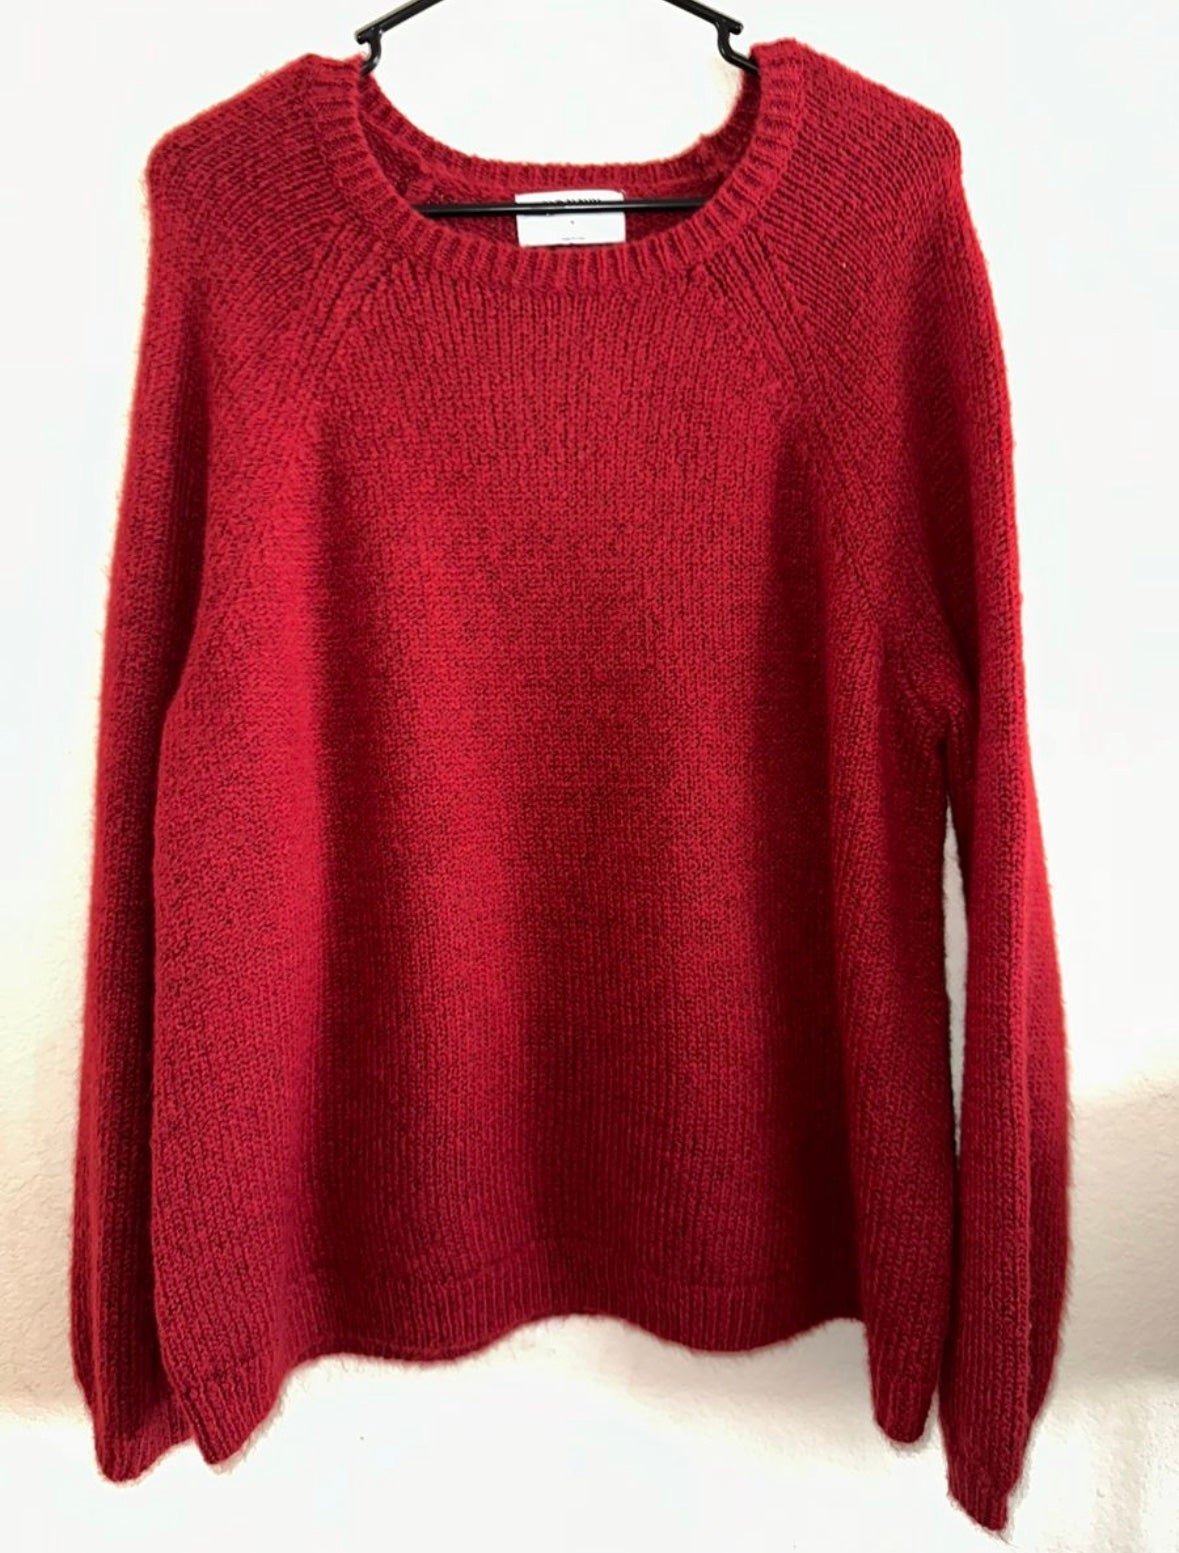 Authentic Red Sweater kztDYajgF US Sale